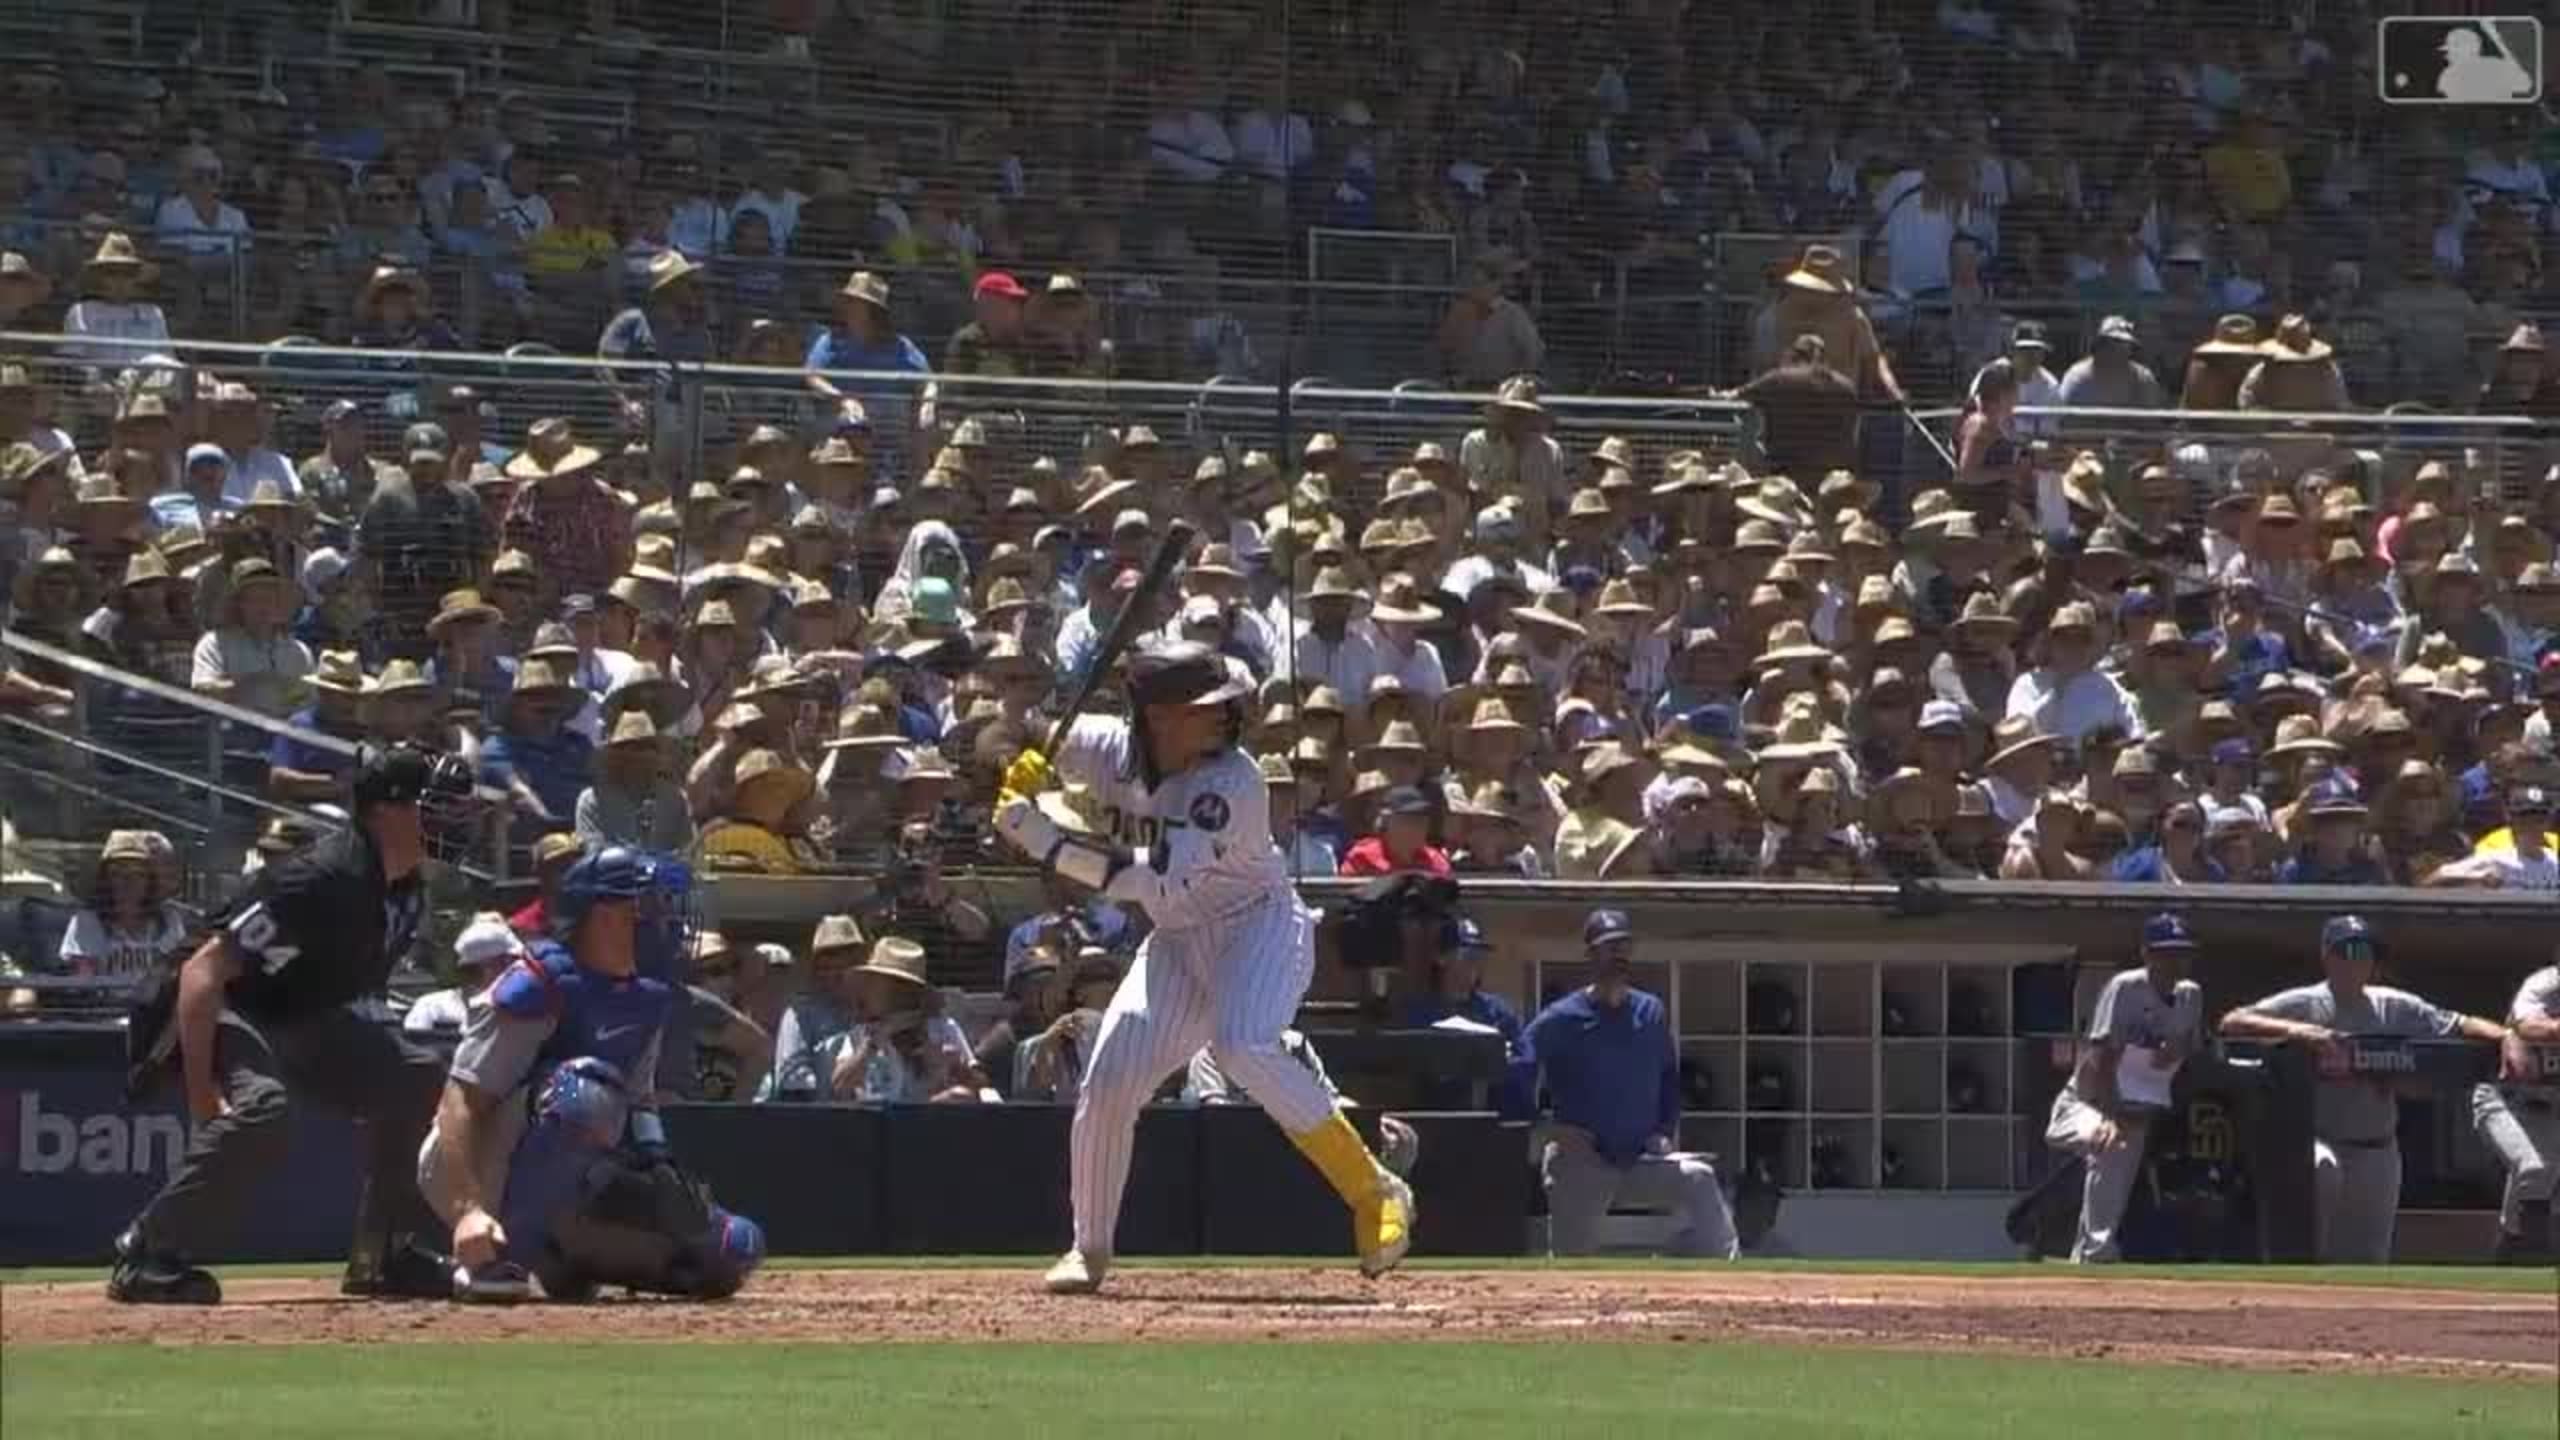 Betts, Outman homer as Dodgers stun Padres 5-2 – KGET 17